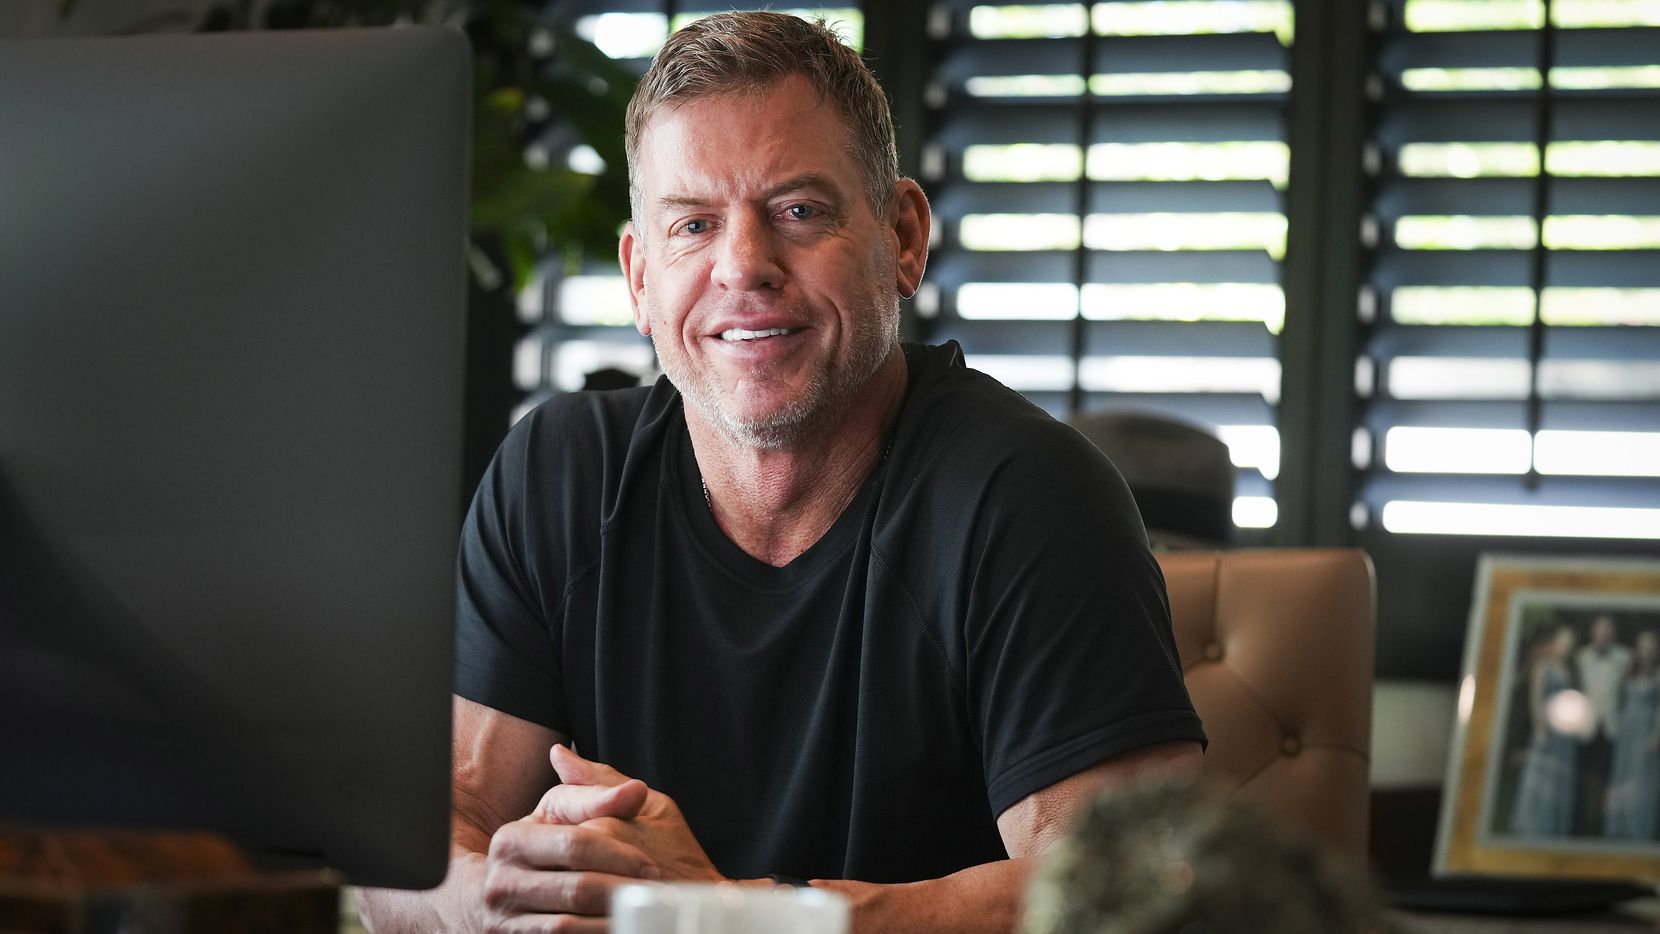 Hall of Fame quarterback Troy Aikman co-founded a company selling Eight, a light beer named for his football jersey number.